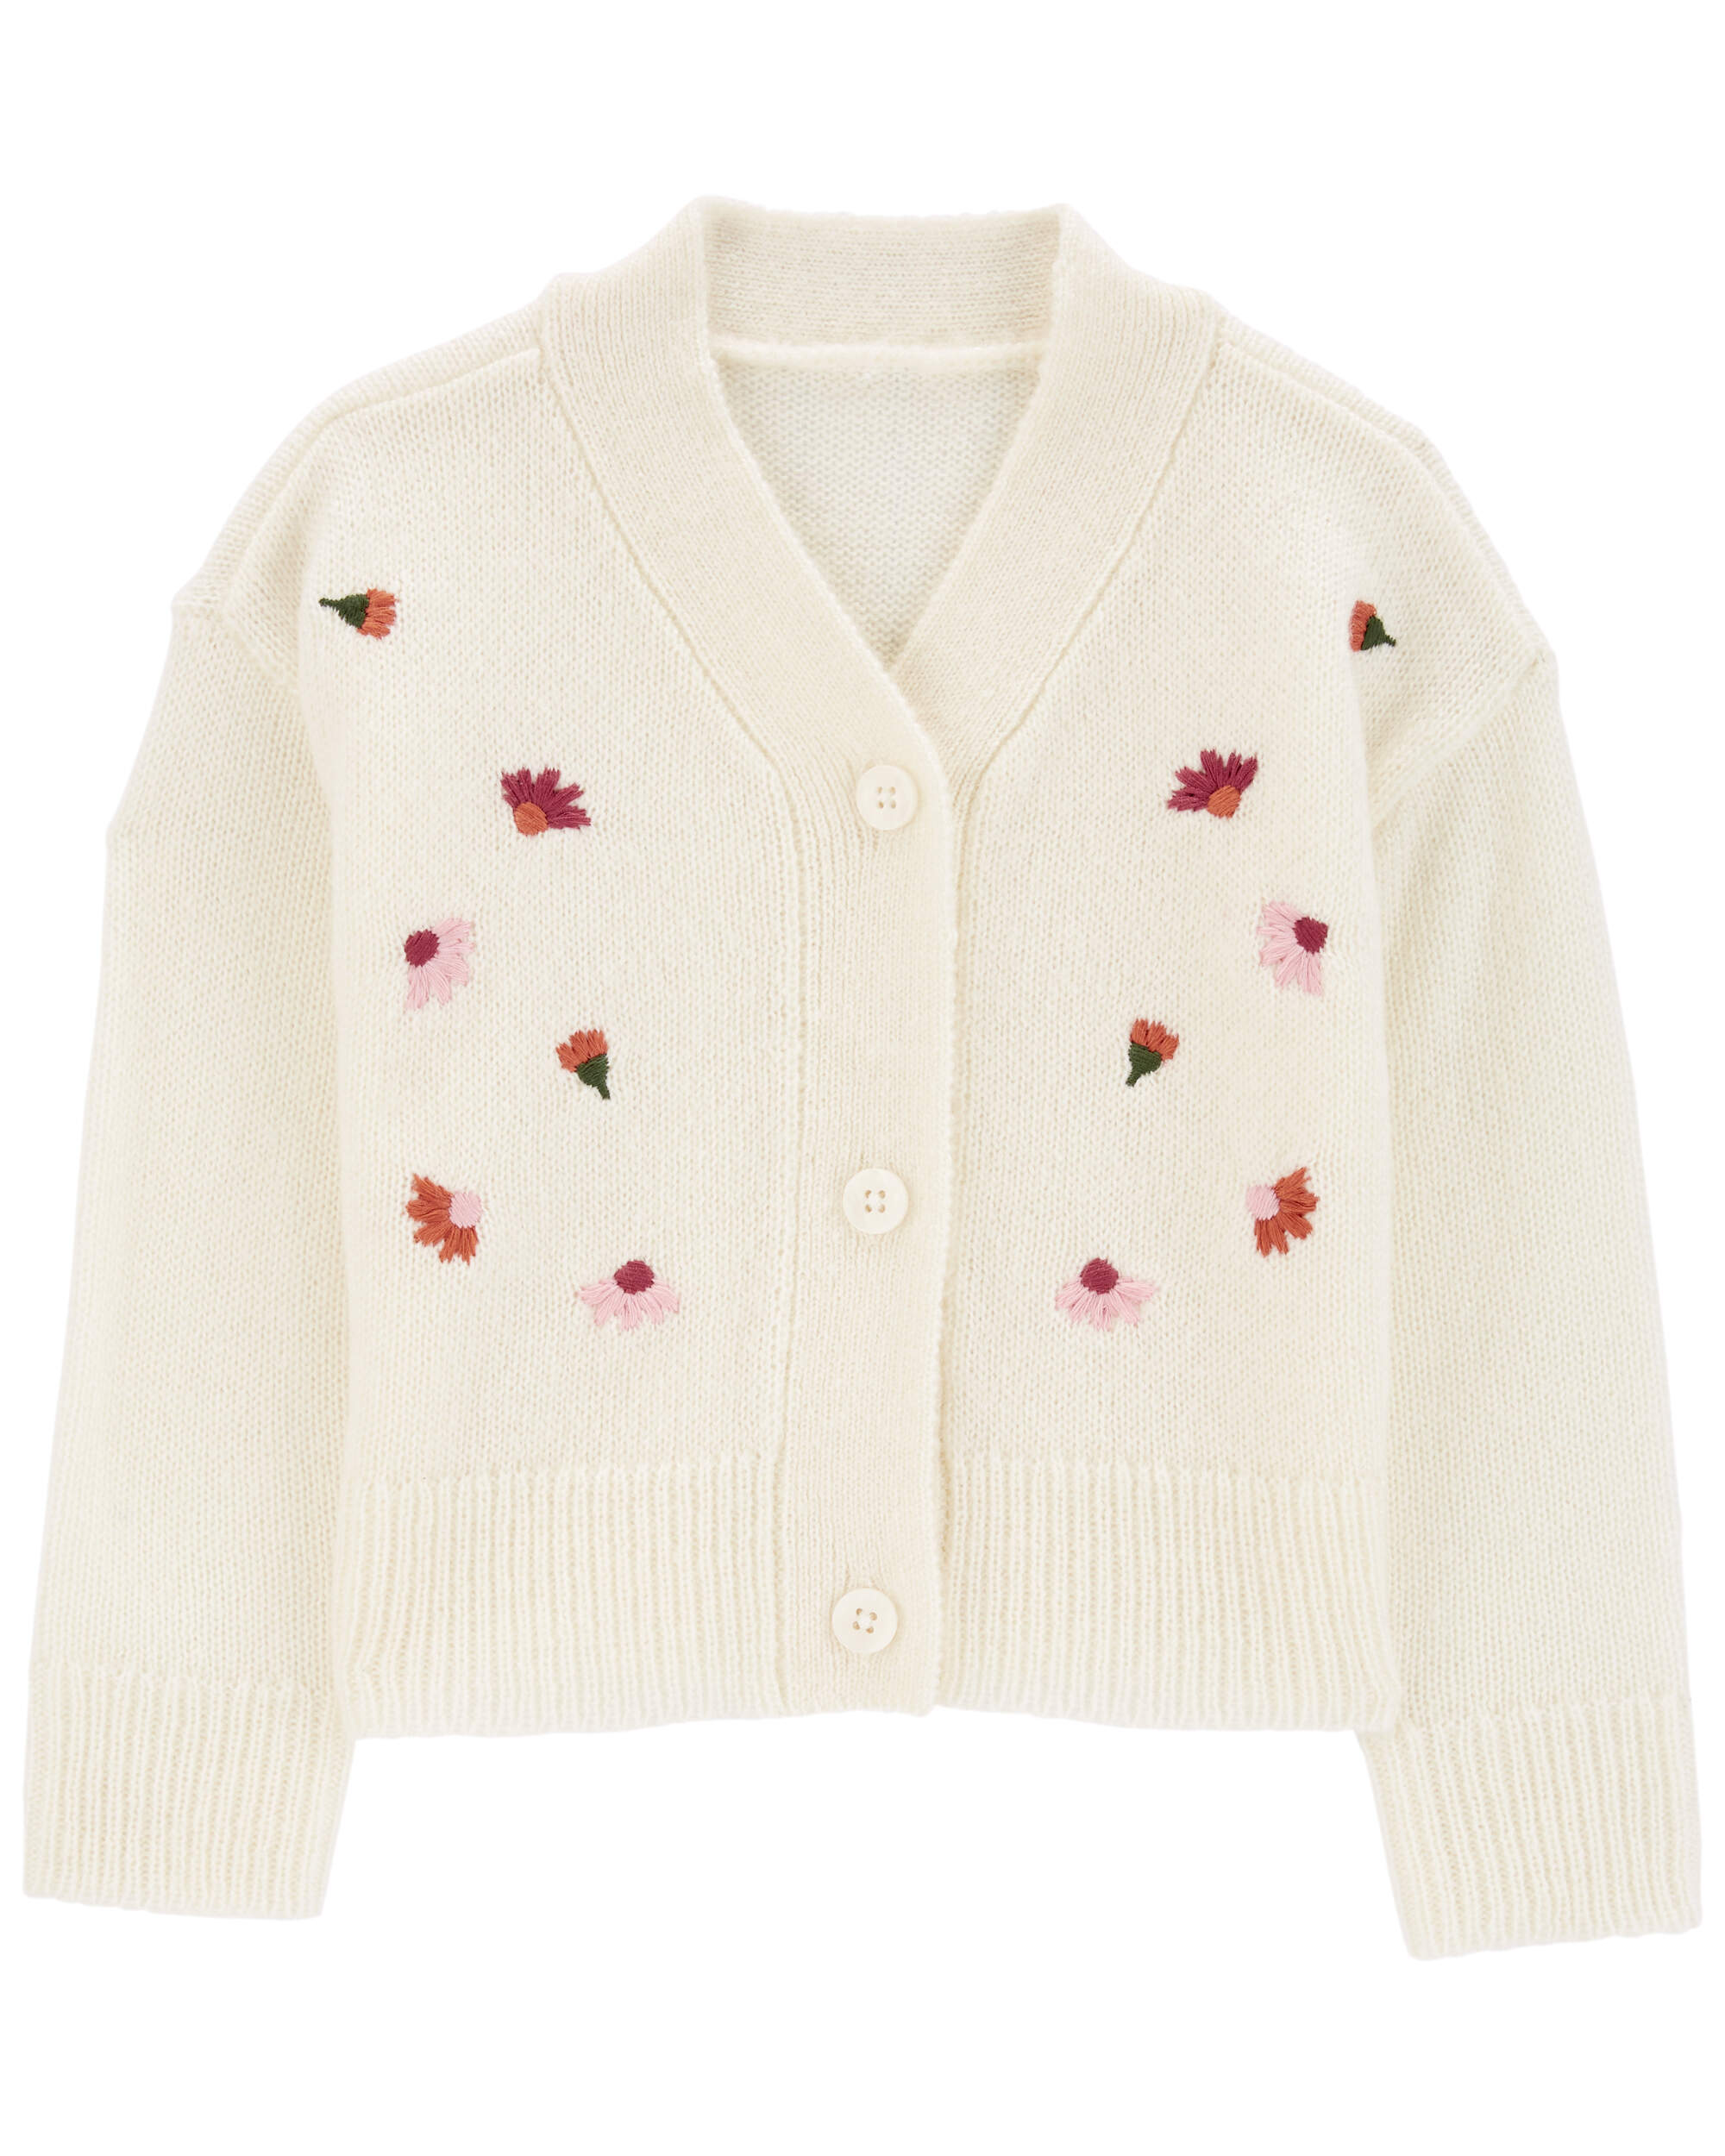 Baby Floral Sweater Knit Cardigan